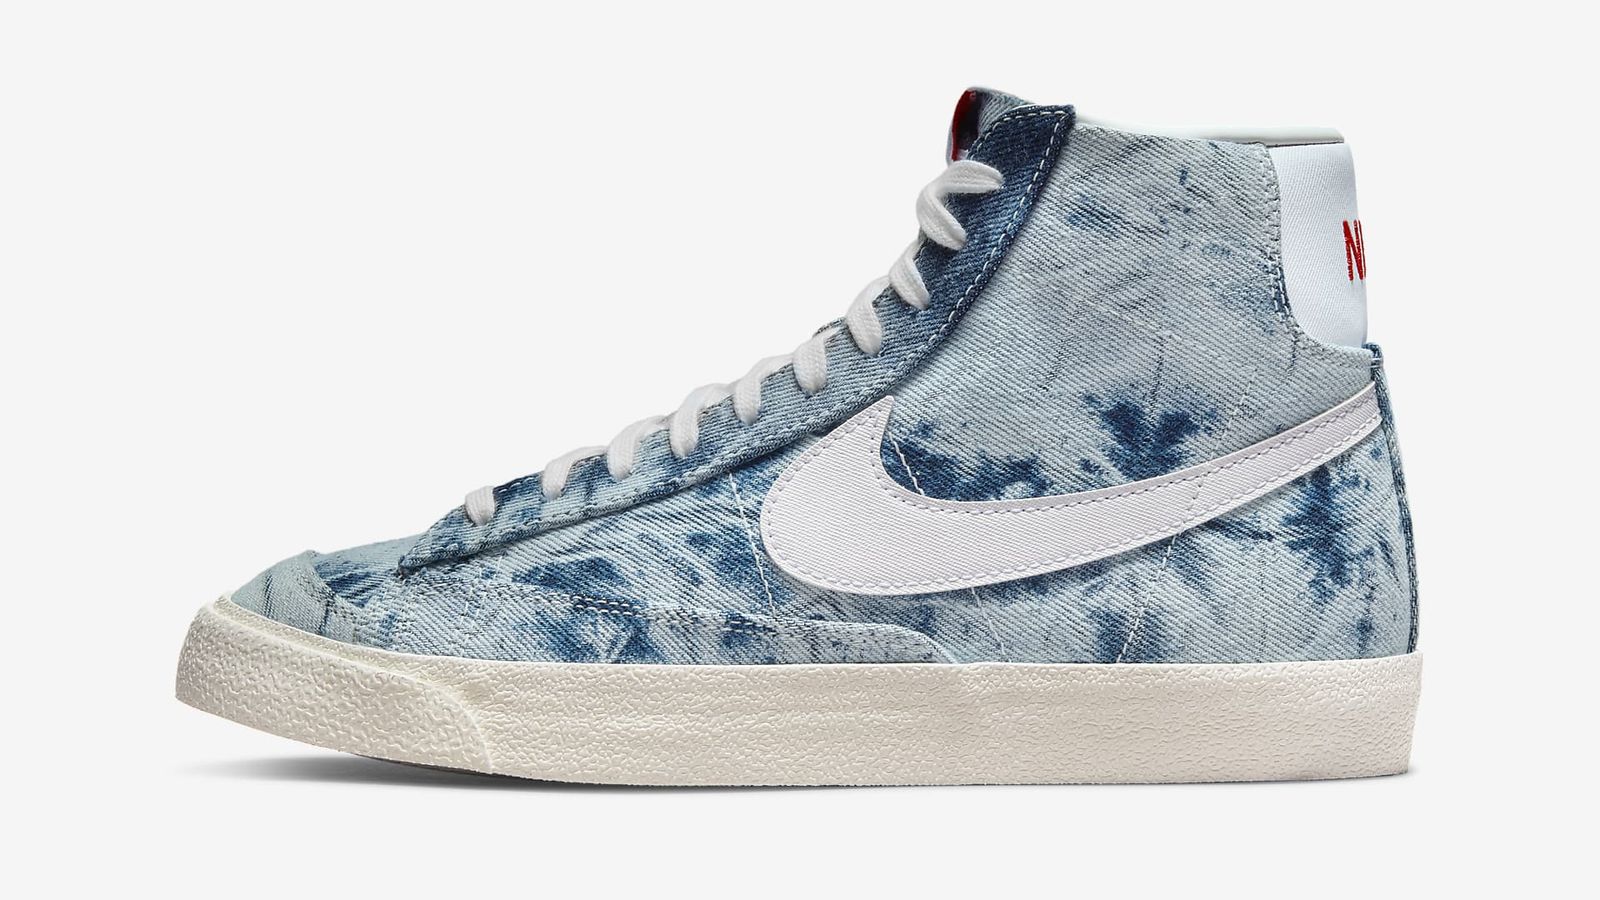 Nike Blazer Mid '77 "Washed Denim" product image of a blue denim-like canvas mid-top Nike featuring a white Swoosh and sole.